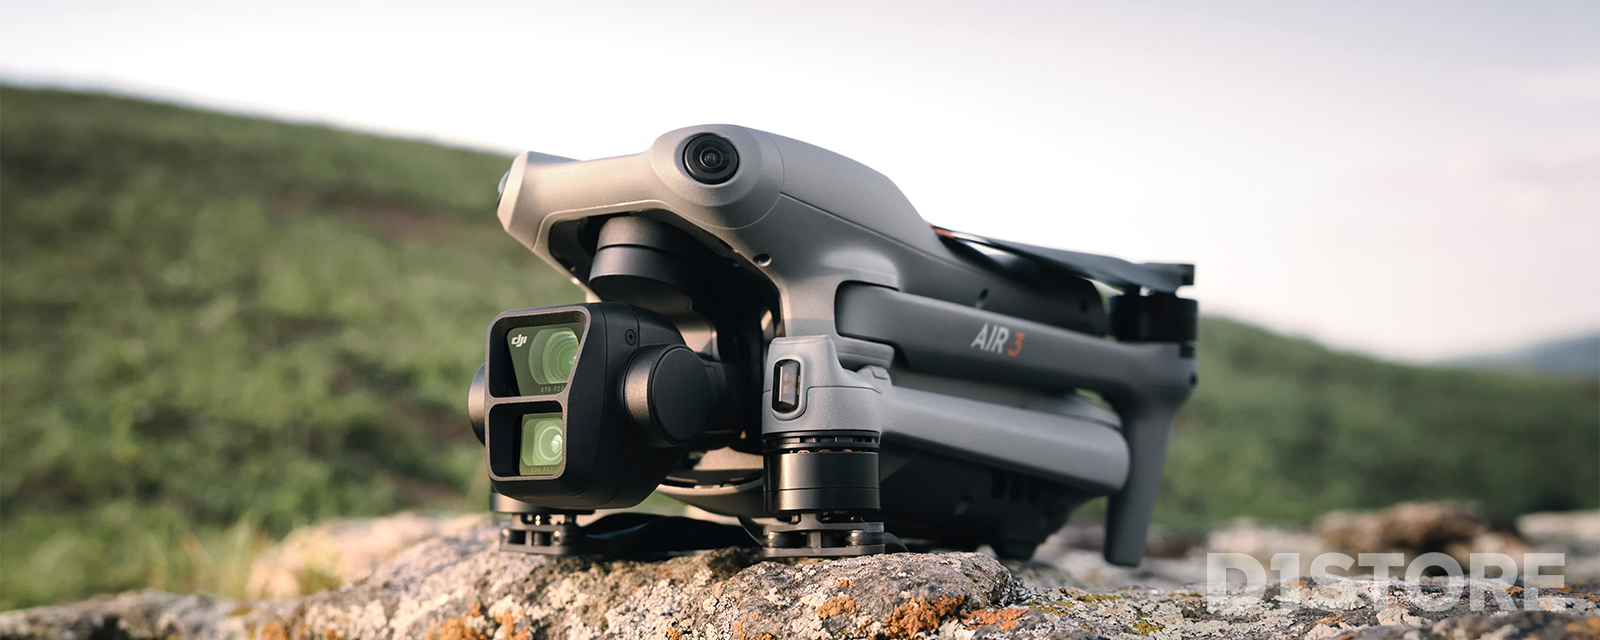 DJI Care Refresh | Shop Now at D1 Store